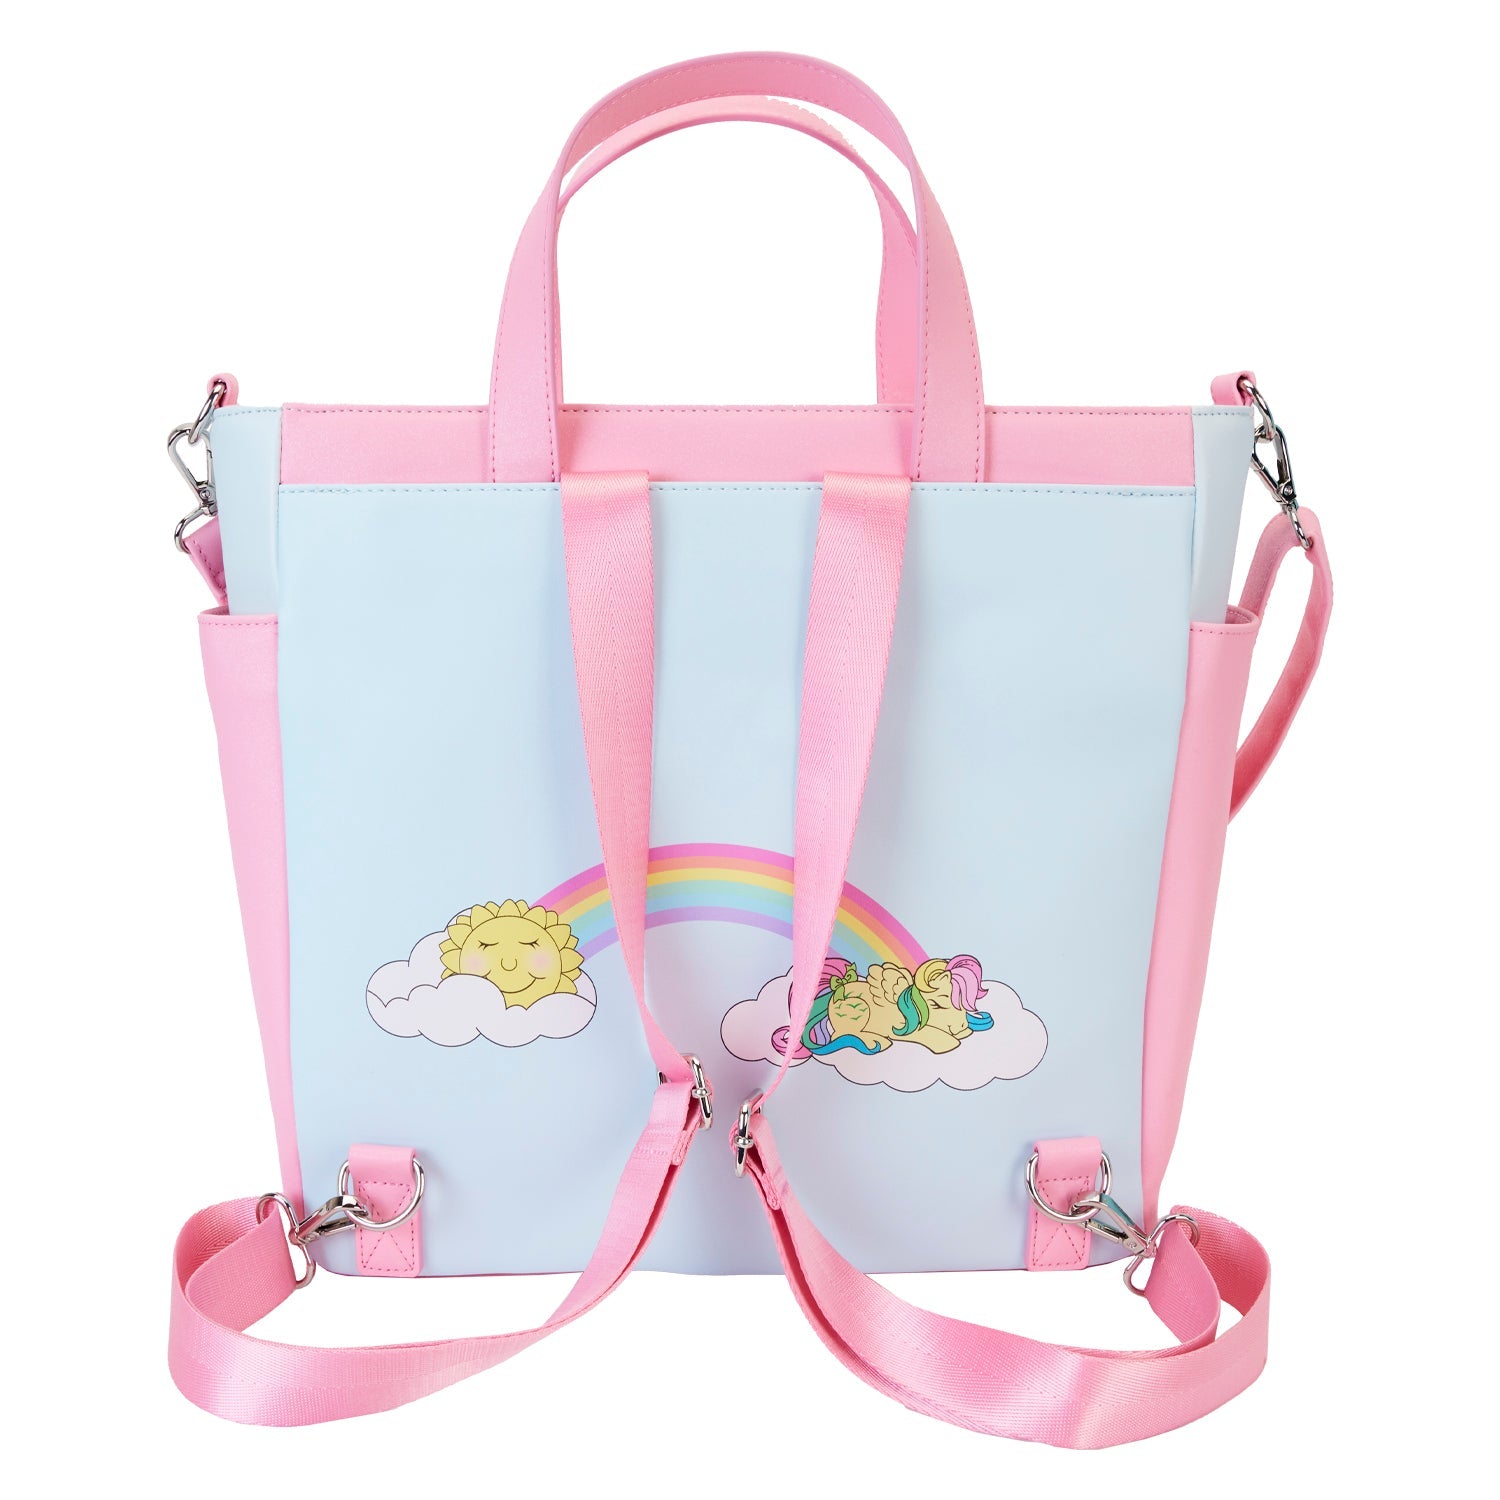 Loungefly x Hasbro My Little Pony Sky Scene Convertible Tote Bag - GeekCore